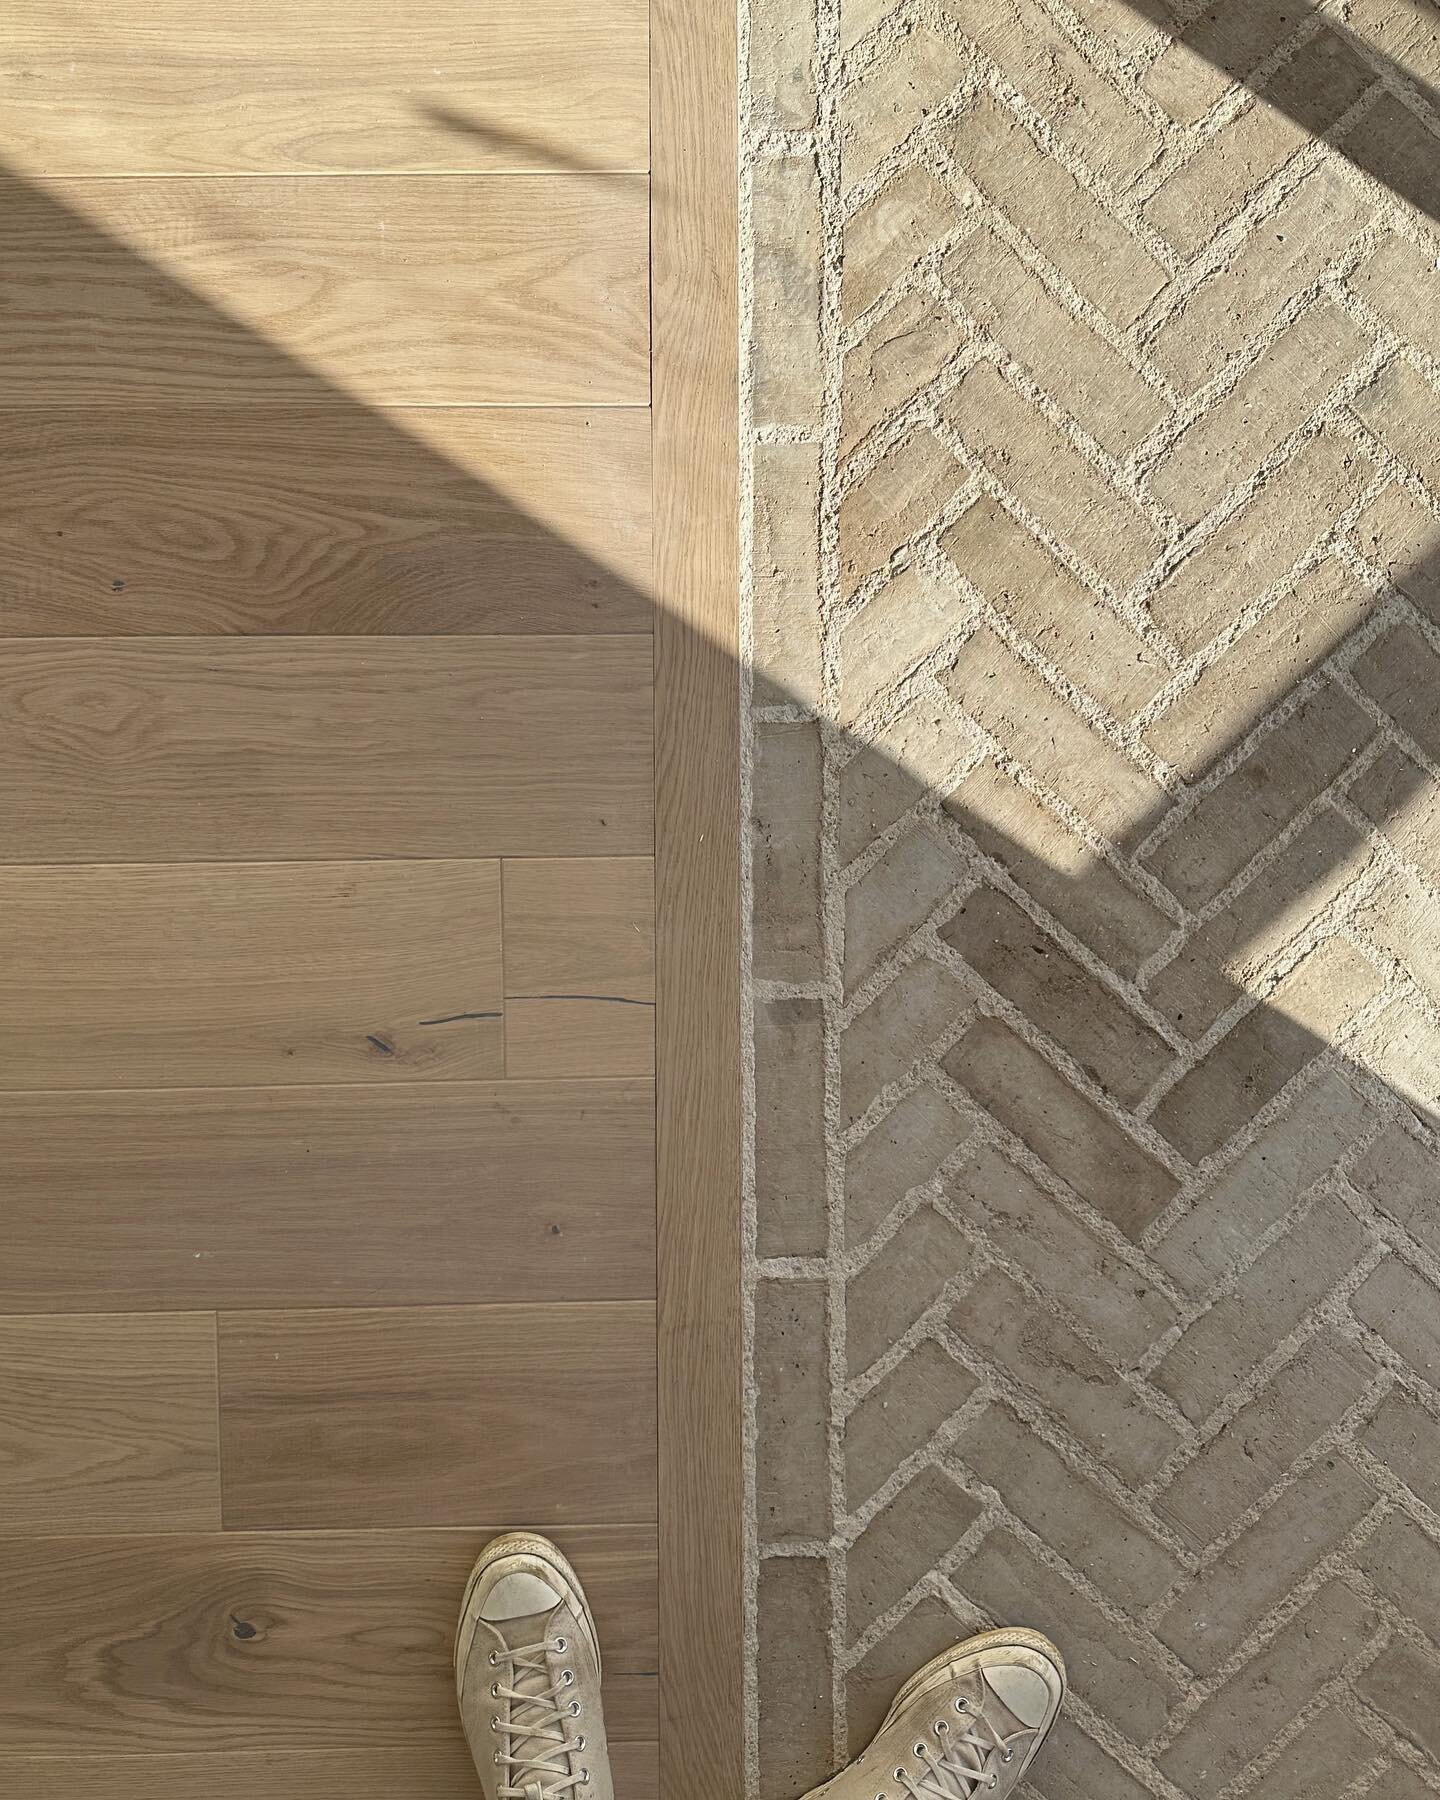 Excited to be nearing completion on our west London retrofit, which features oak and brick flooring in various patterns to distinguish different spaces within the home.